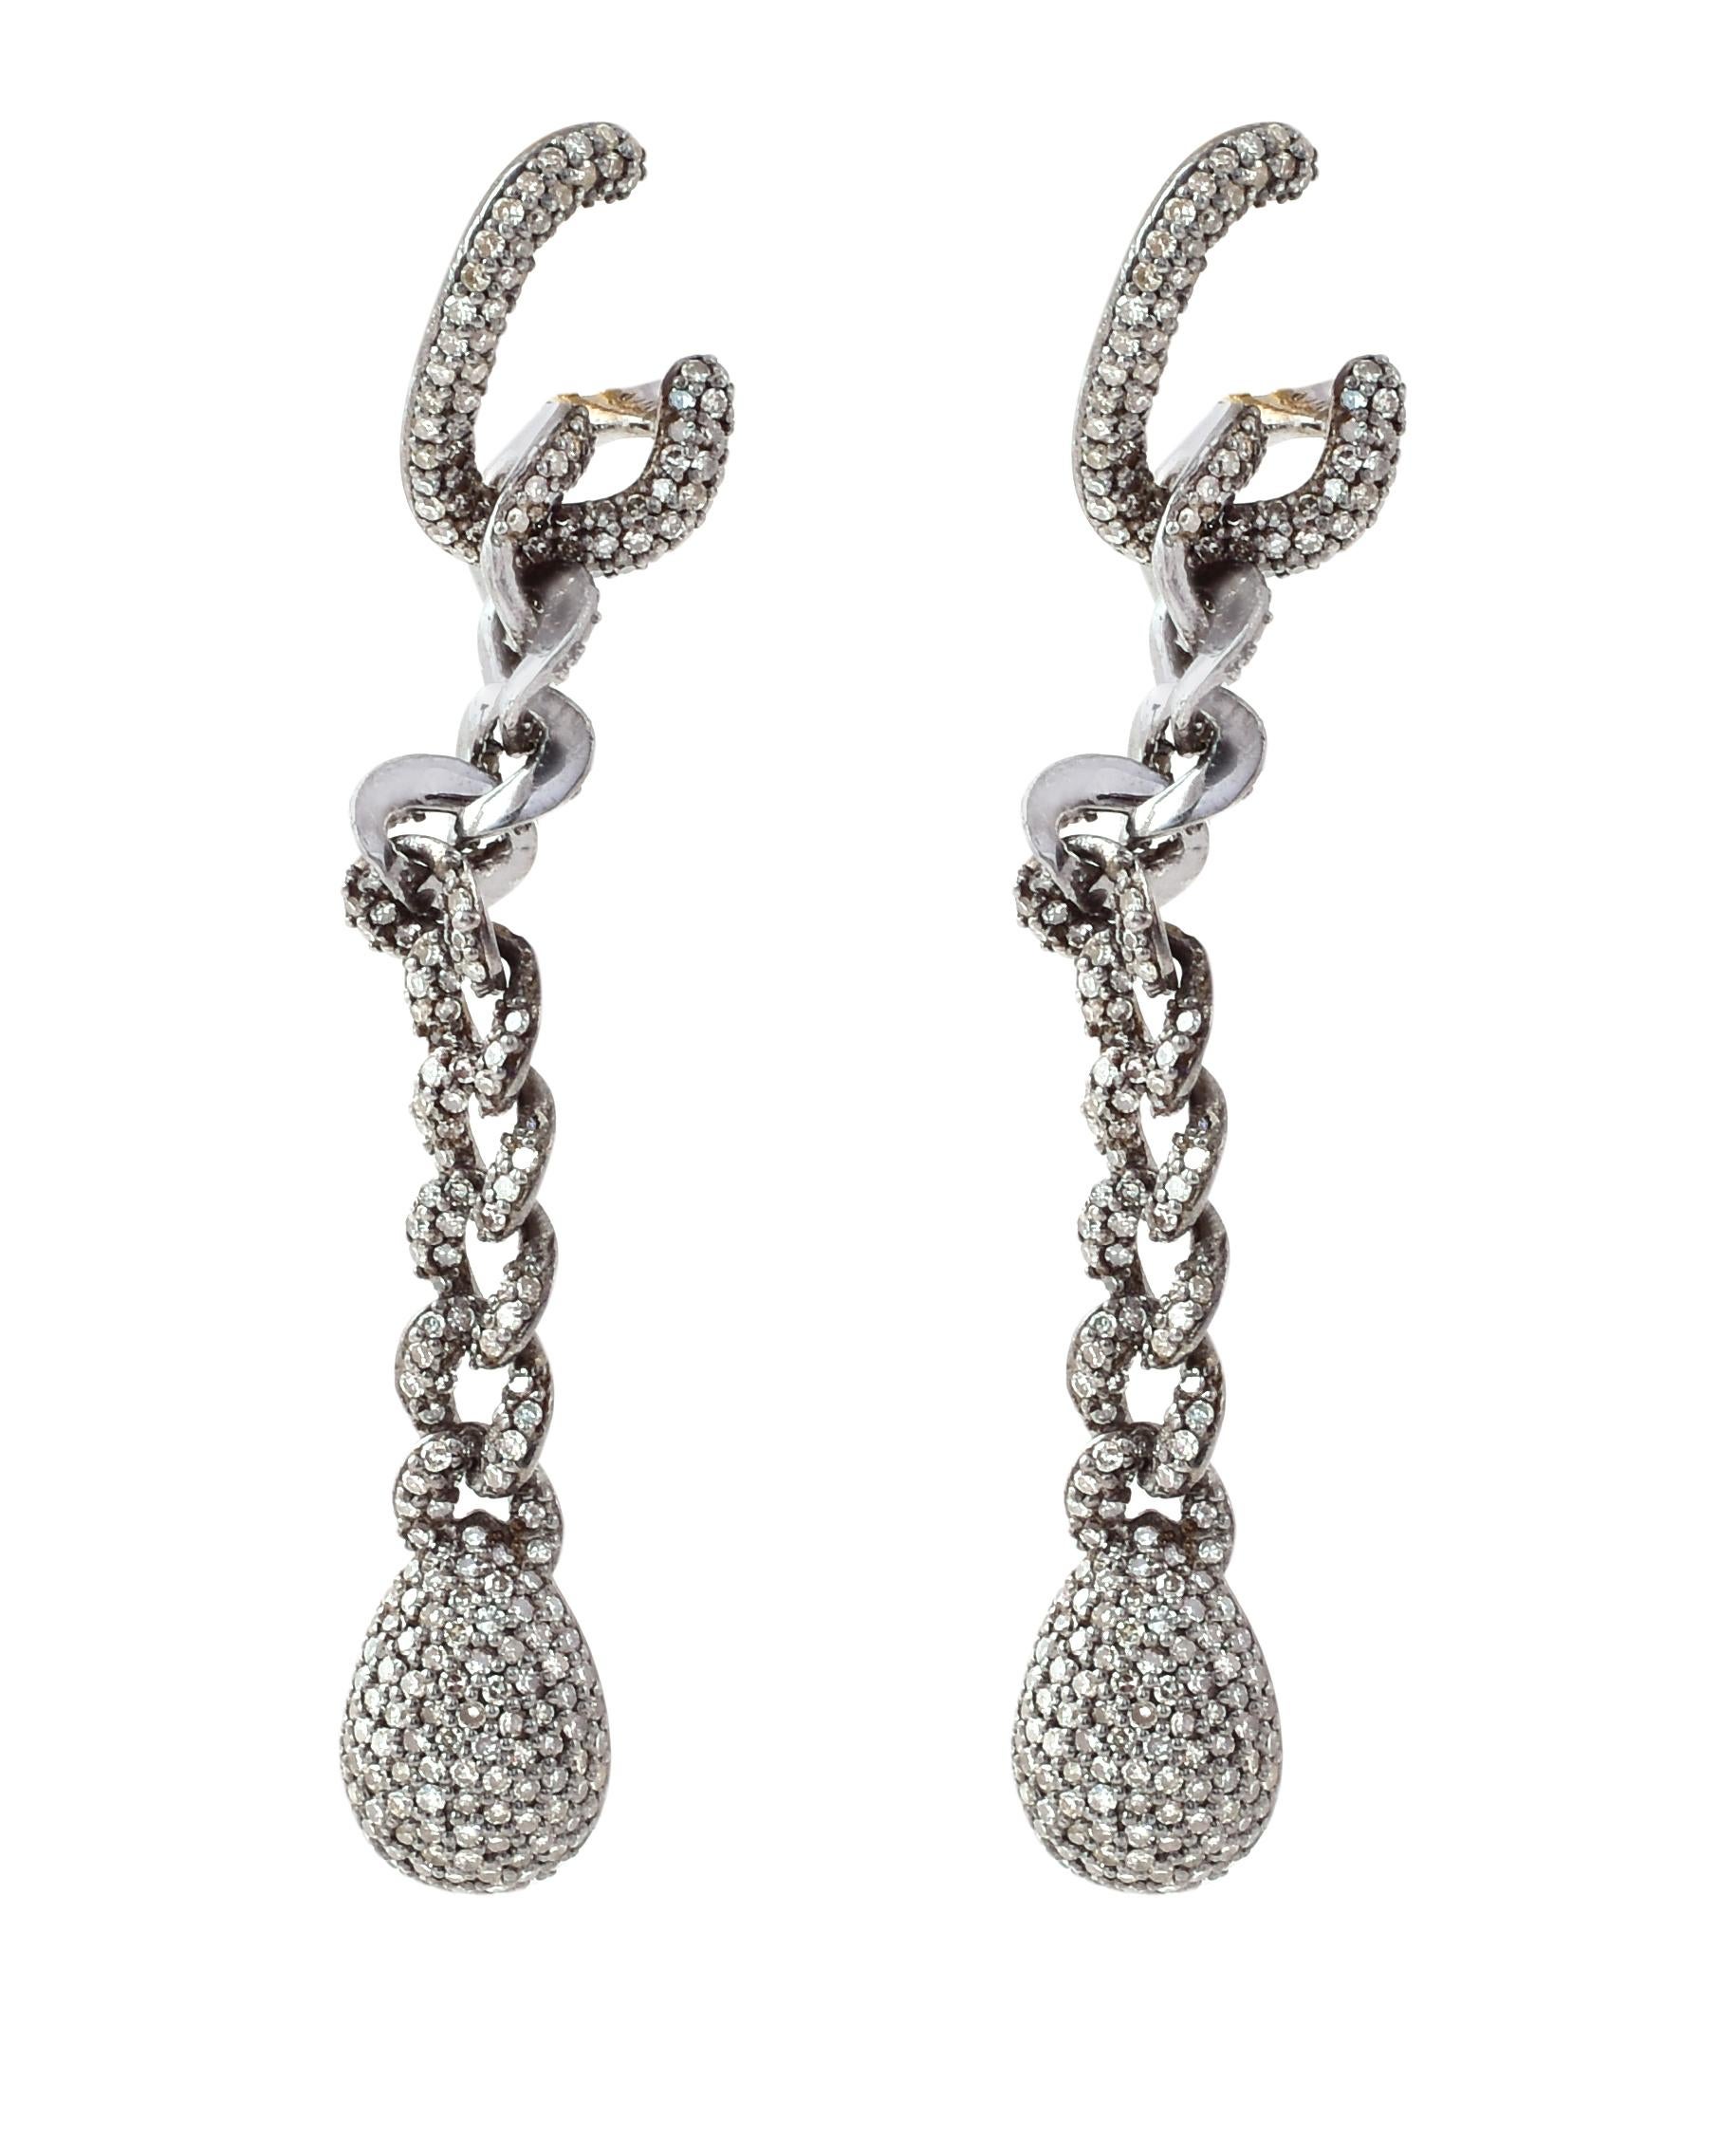 Round Cut 2.86 Carat Pave Diamond Link-Chain Drop Earrings For Sale